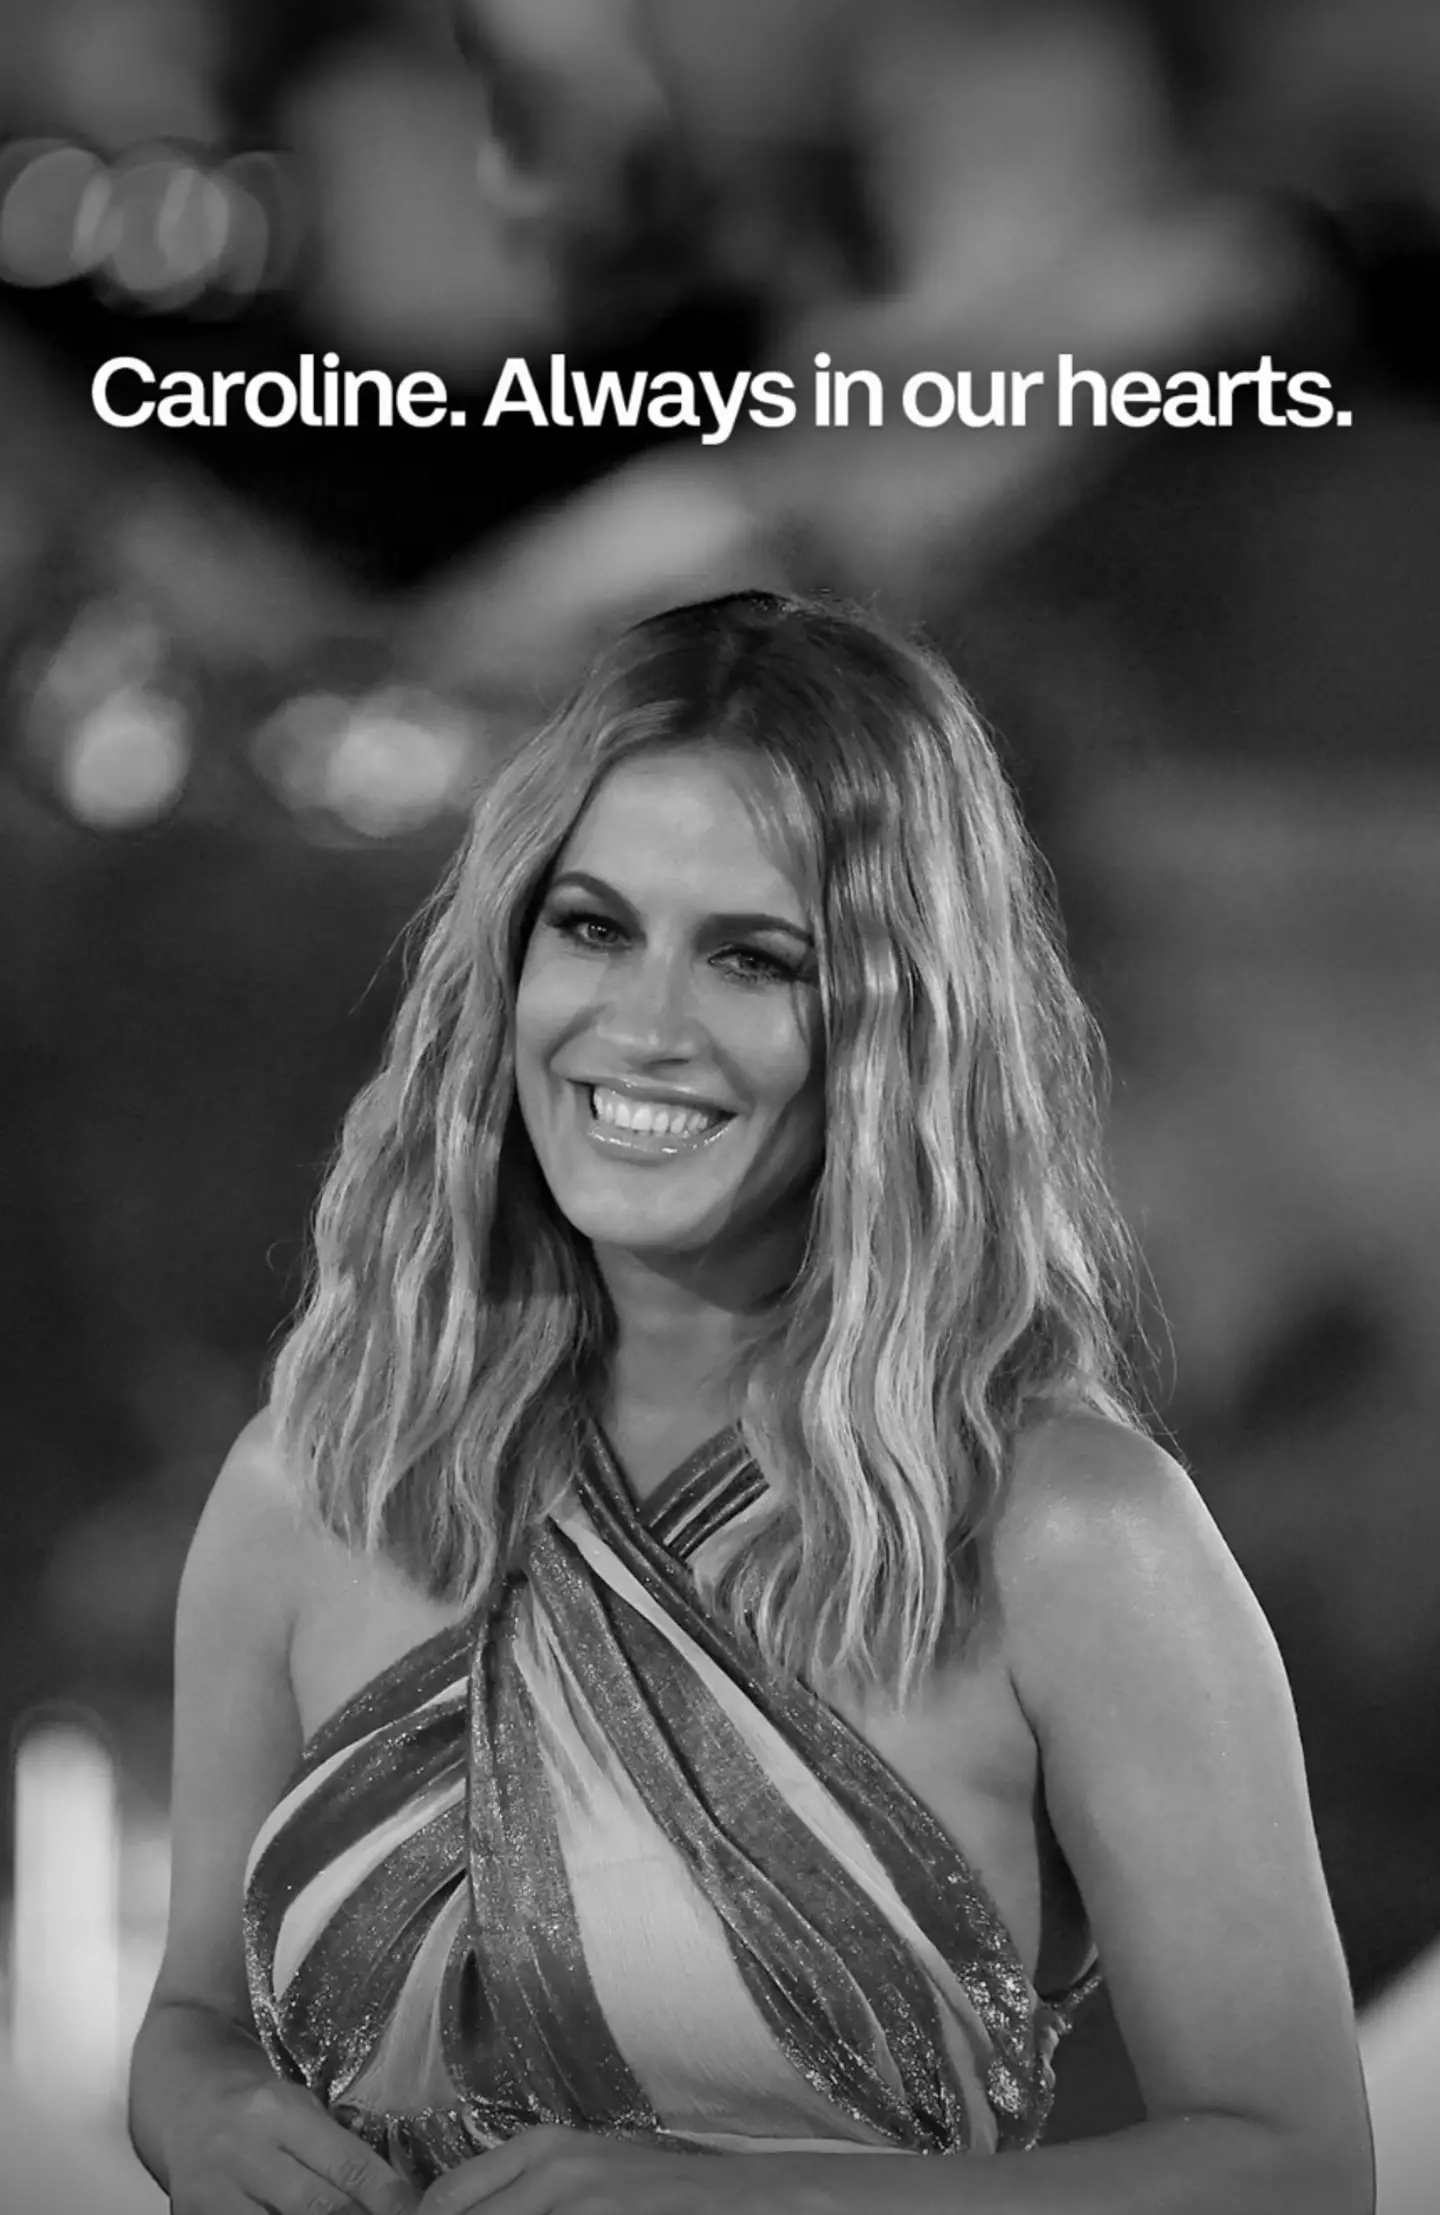 Love Island paid tribute to Caroline on its Instagram page.